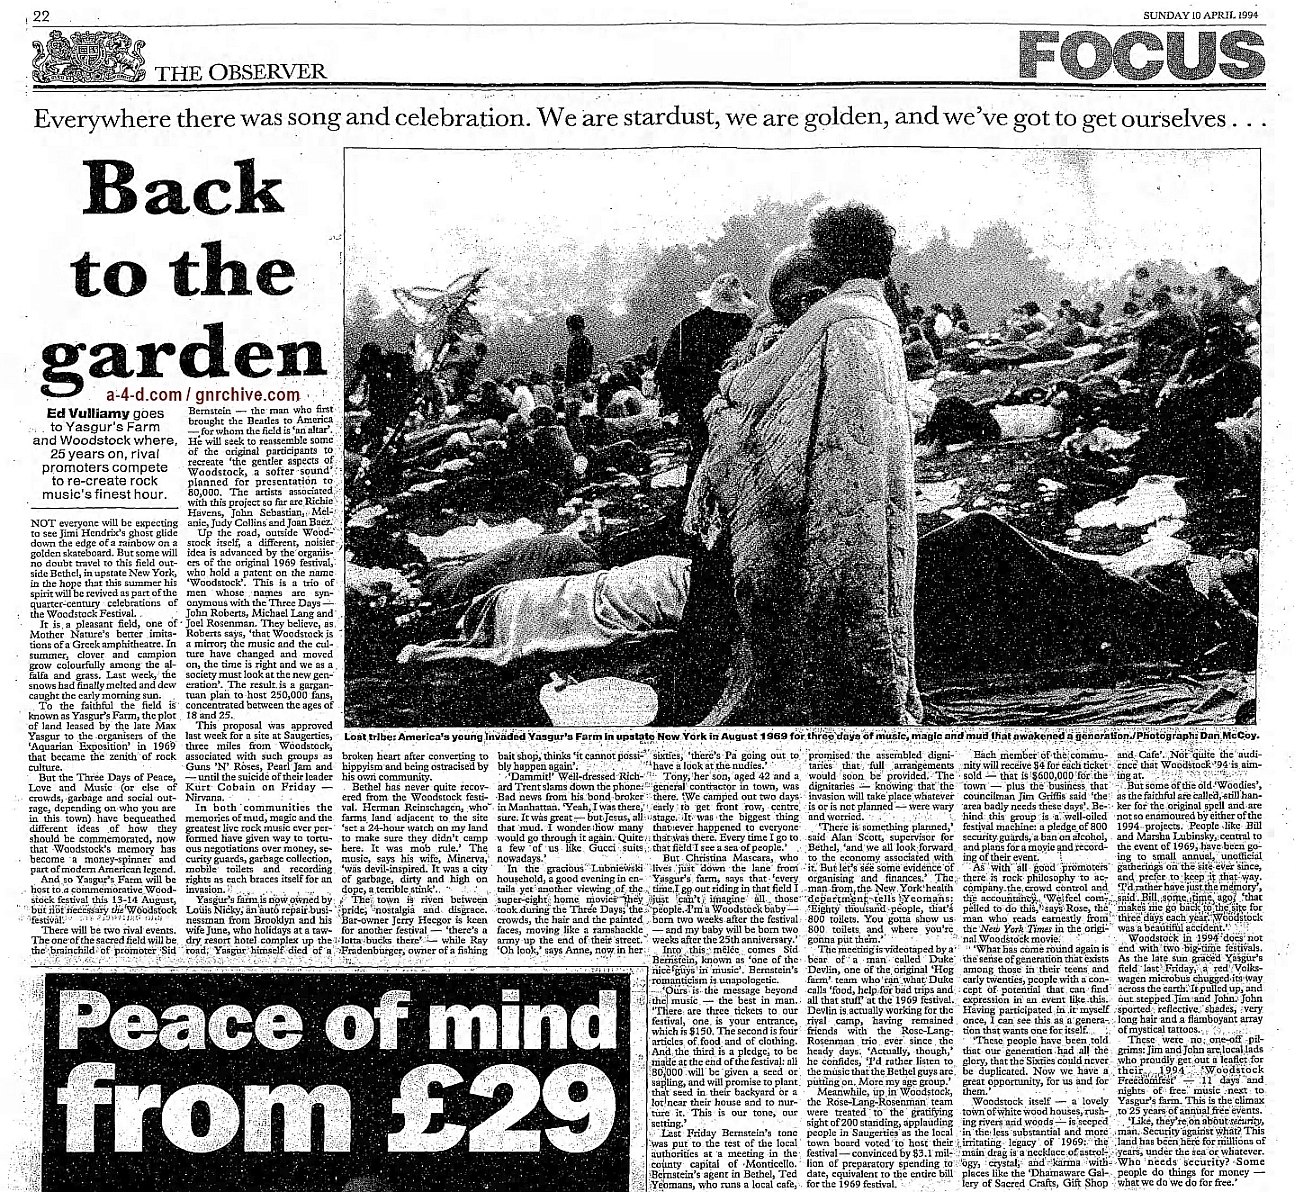 1994.04.21 - AP/Press and Sun Bulletin - Woodstock II acts revealed 1994_045